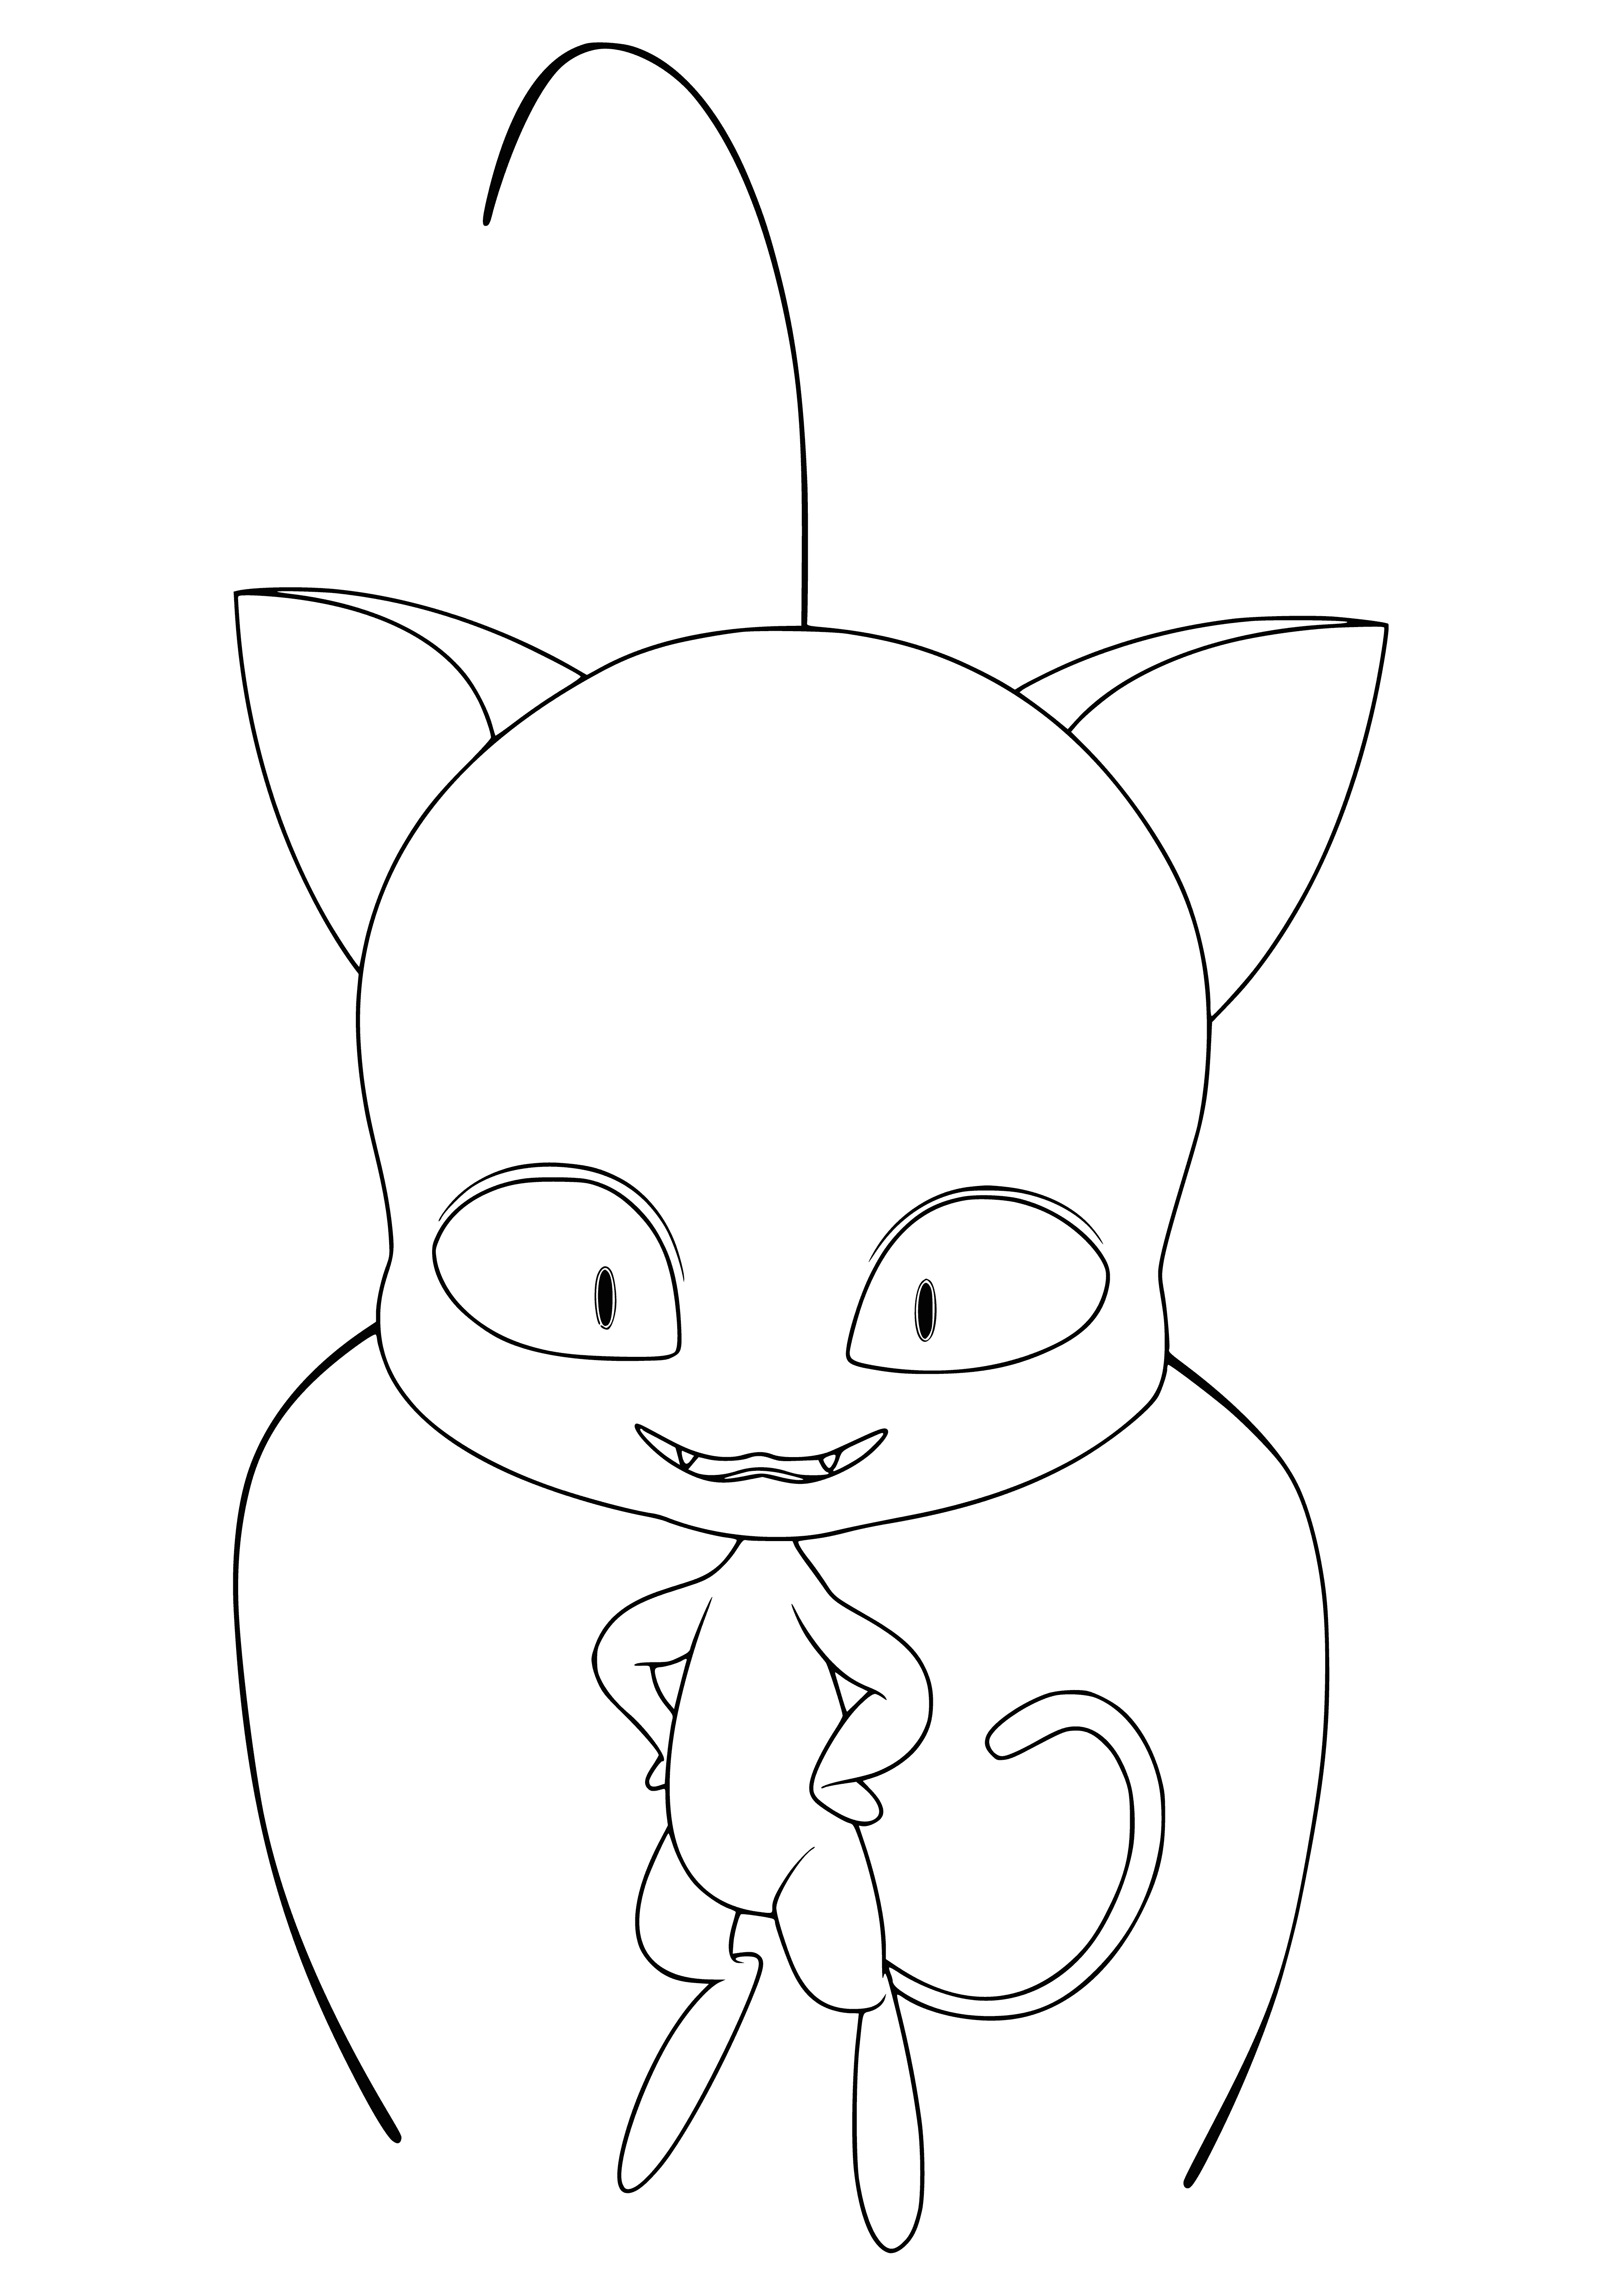 Kwami plagg coloring page